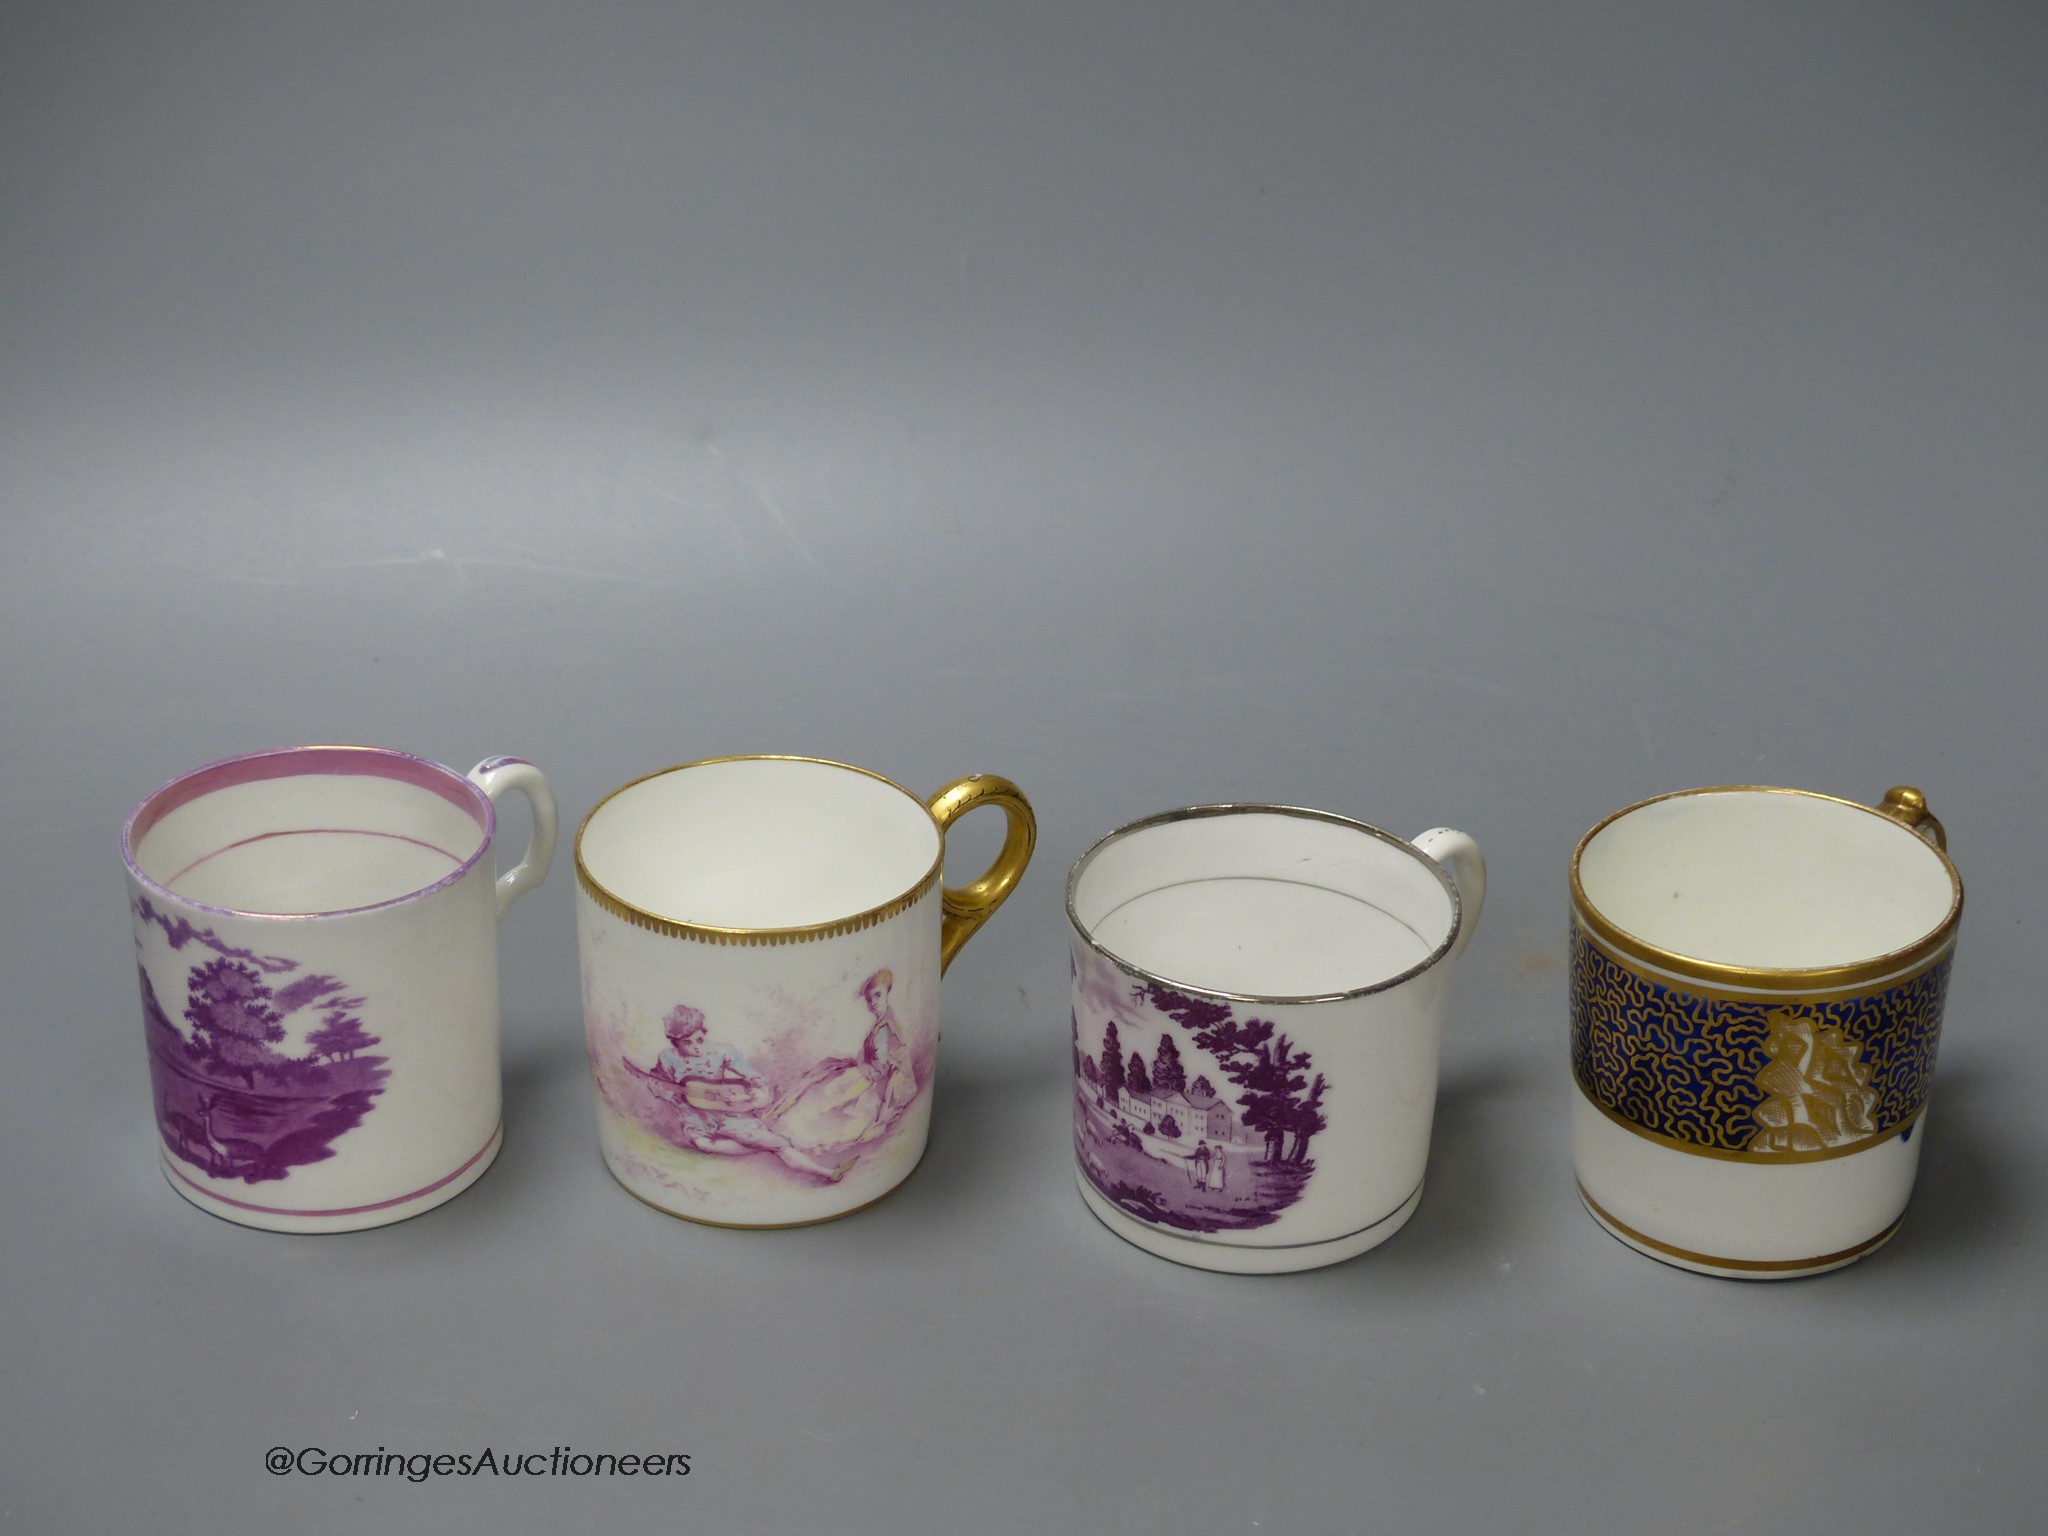 Four coffee cans Minton painted in Watteauseque style made for A.B.Daniell, another Minton with - Image 2 of 4